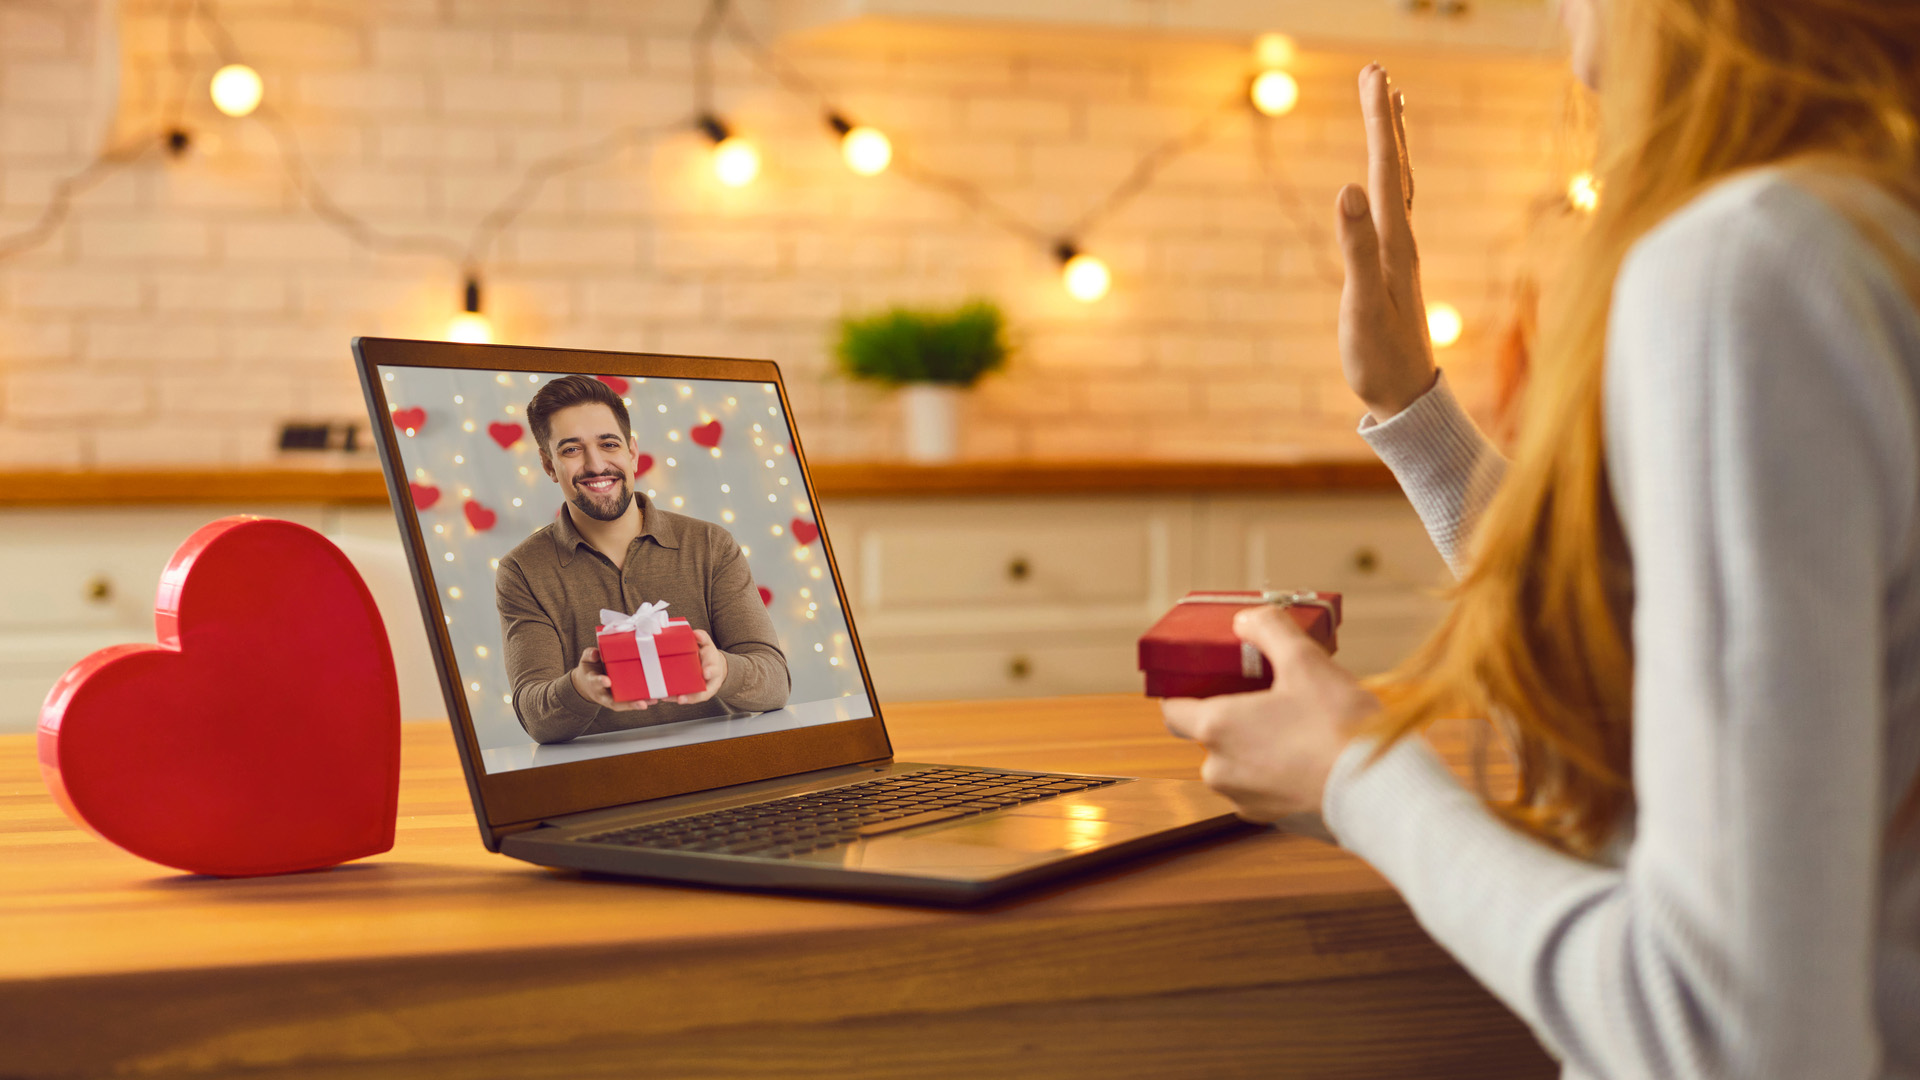 Woman holding a small red box waving at her laptop screen showing a man also holding a red box. A red love-heart on the table